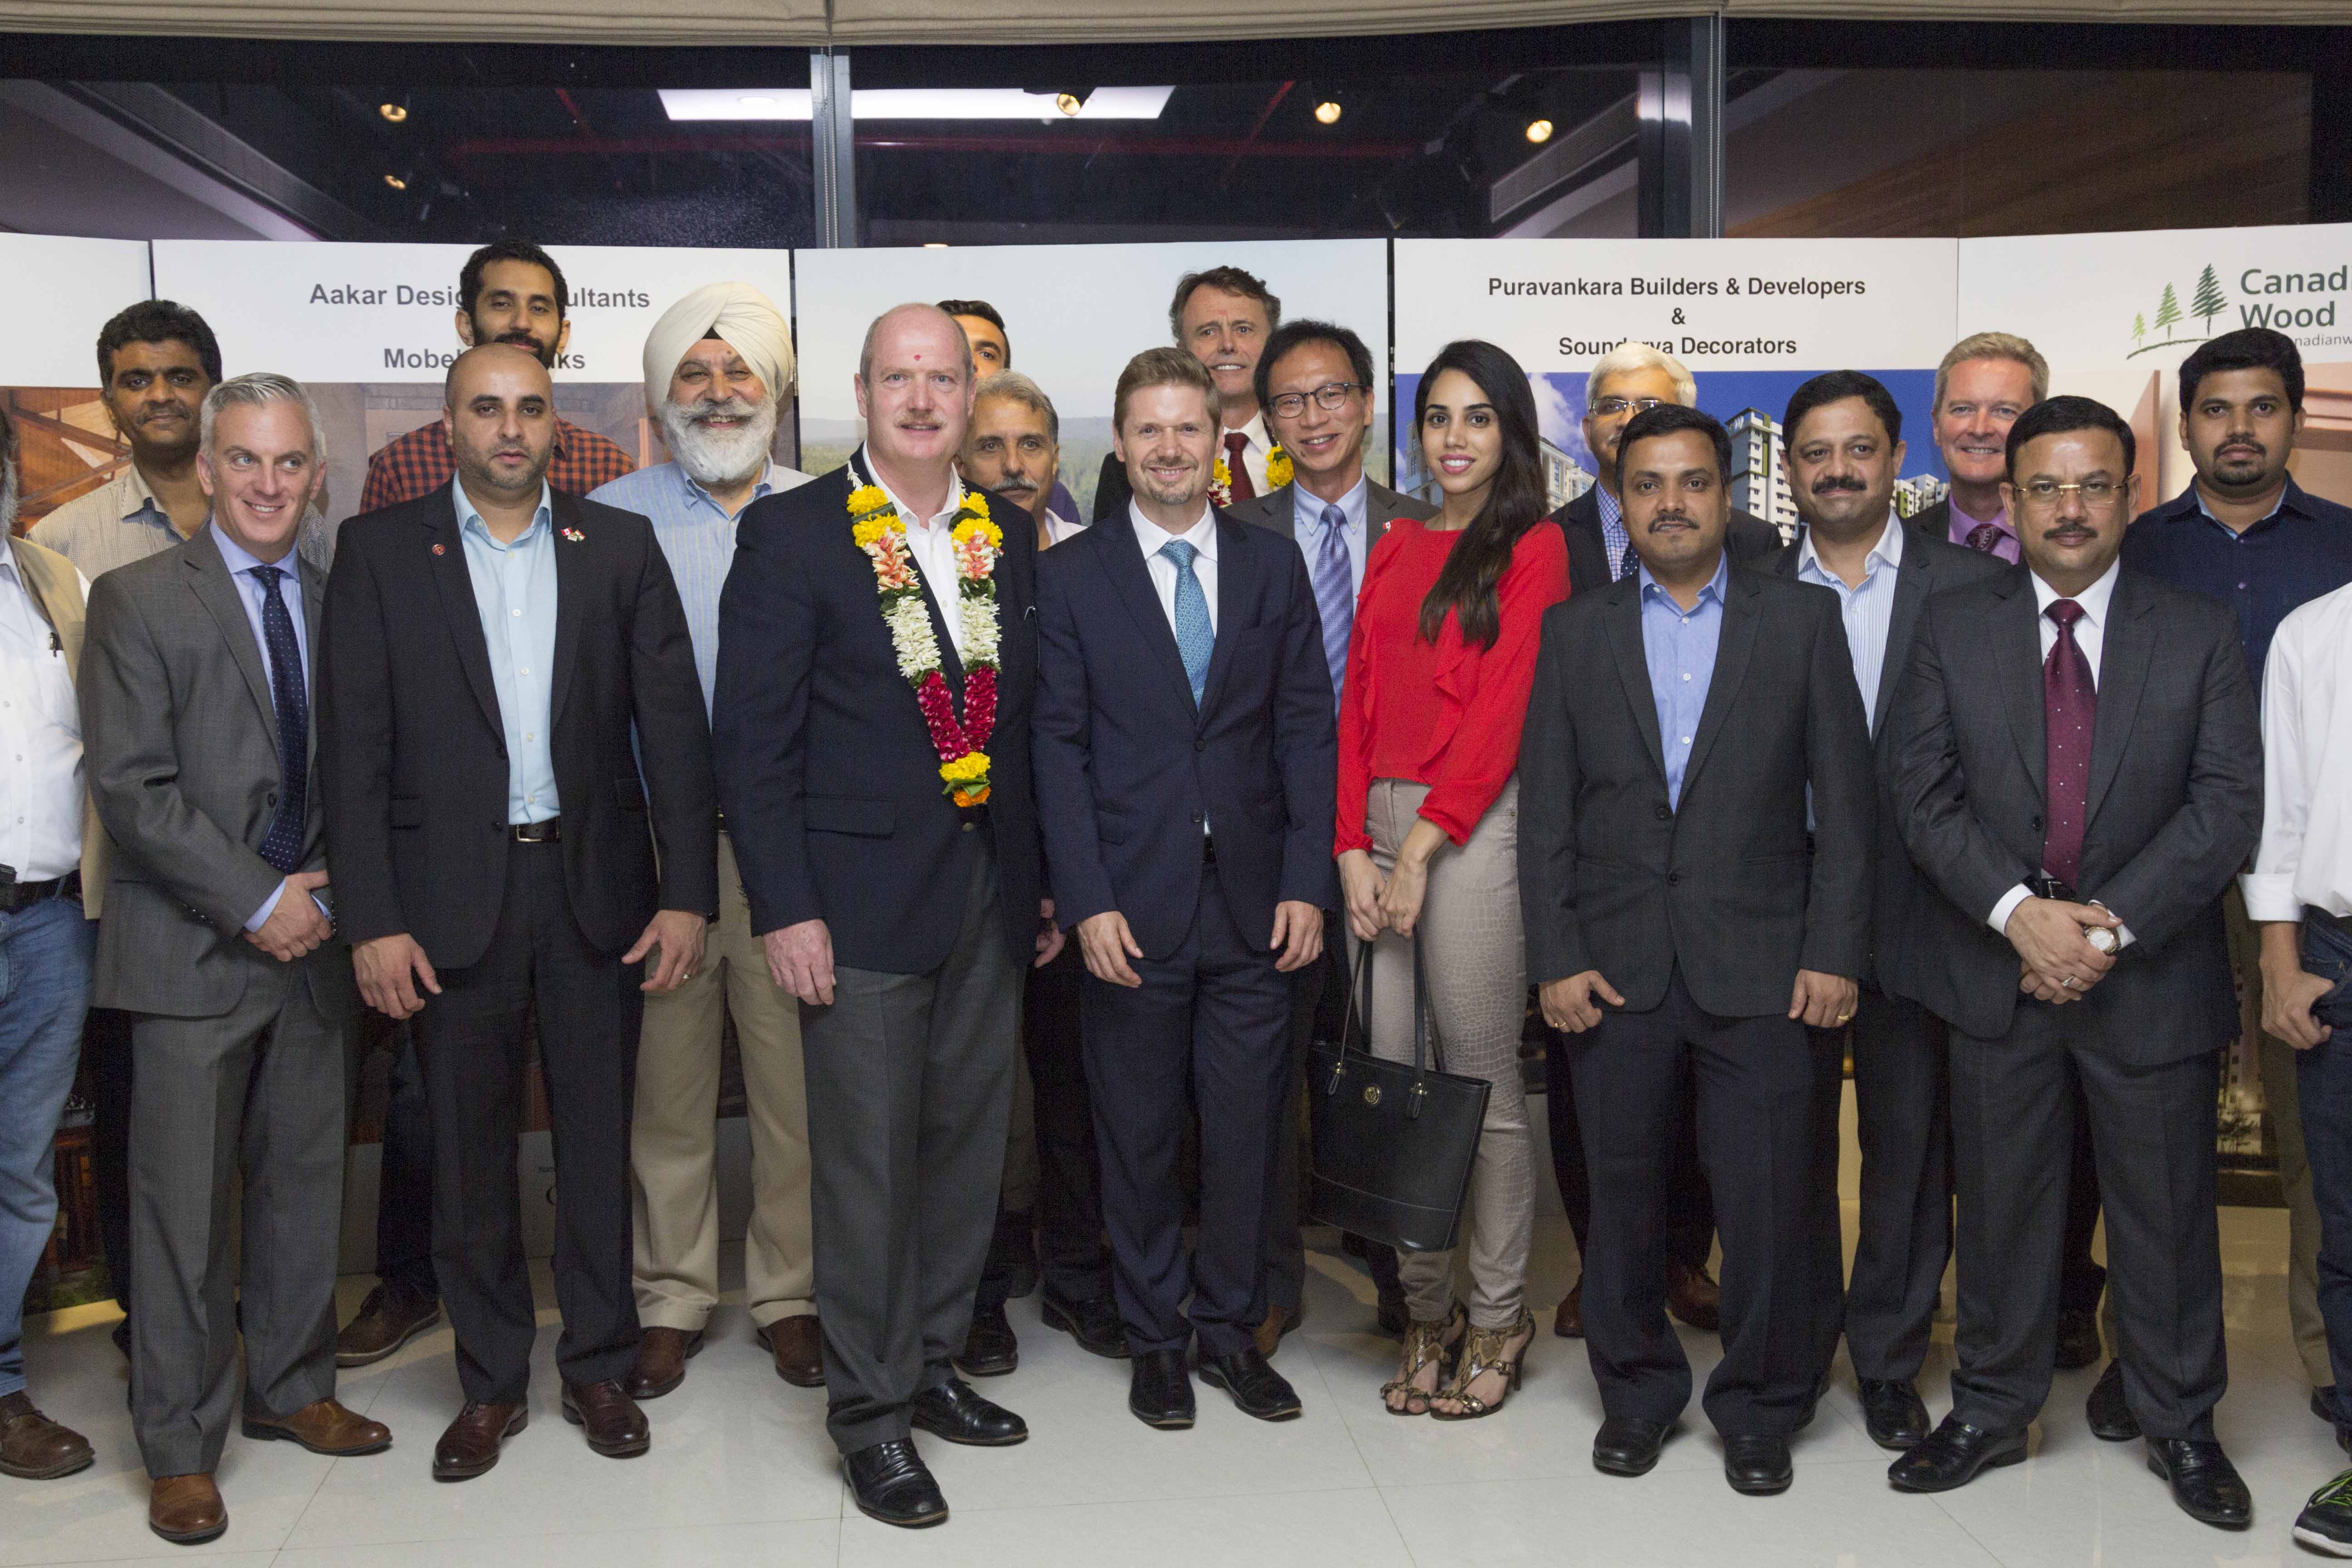 FII India hosts B.C. Minister of Finance, Michael de Jong during networking event